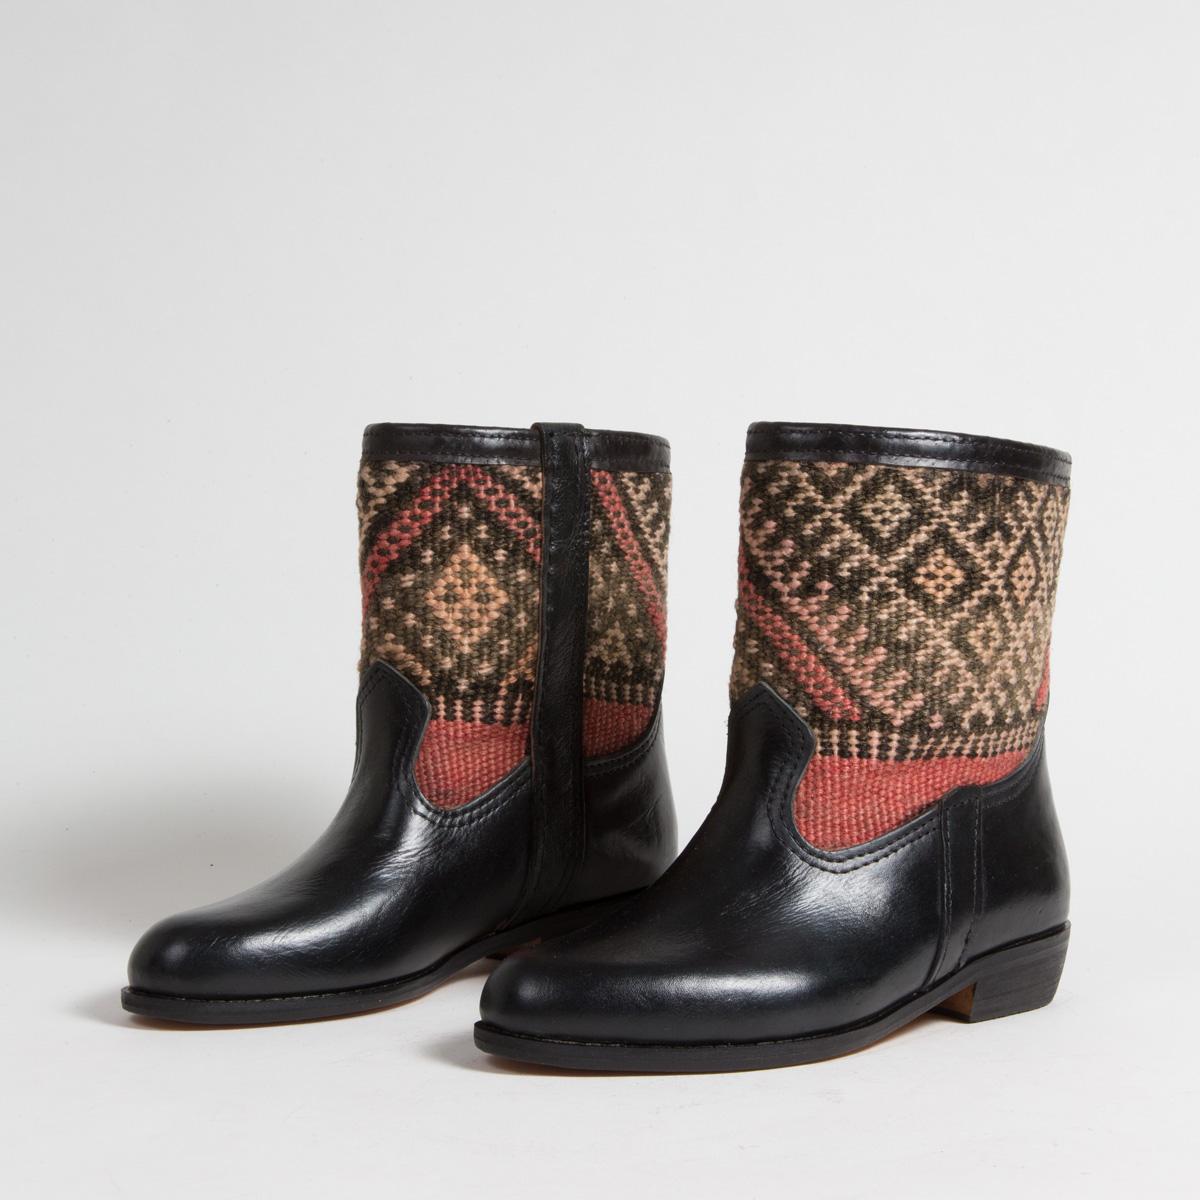 Bottines Kilim cuir mababouche artisanales (Réf. RPN10-38)